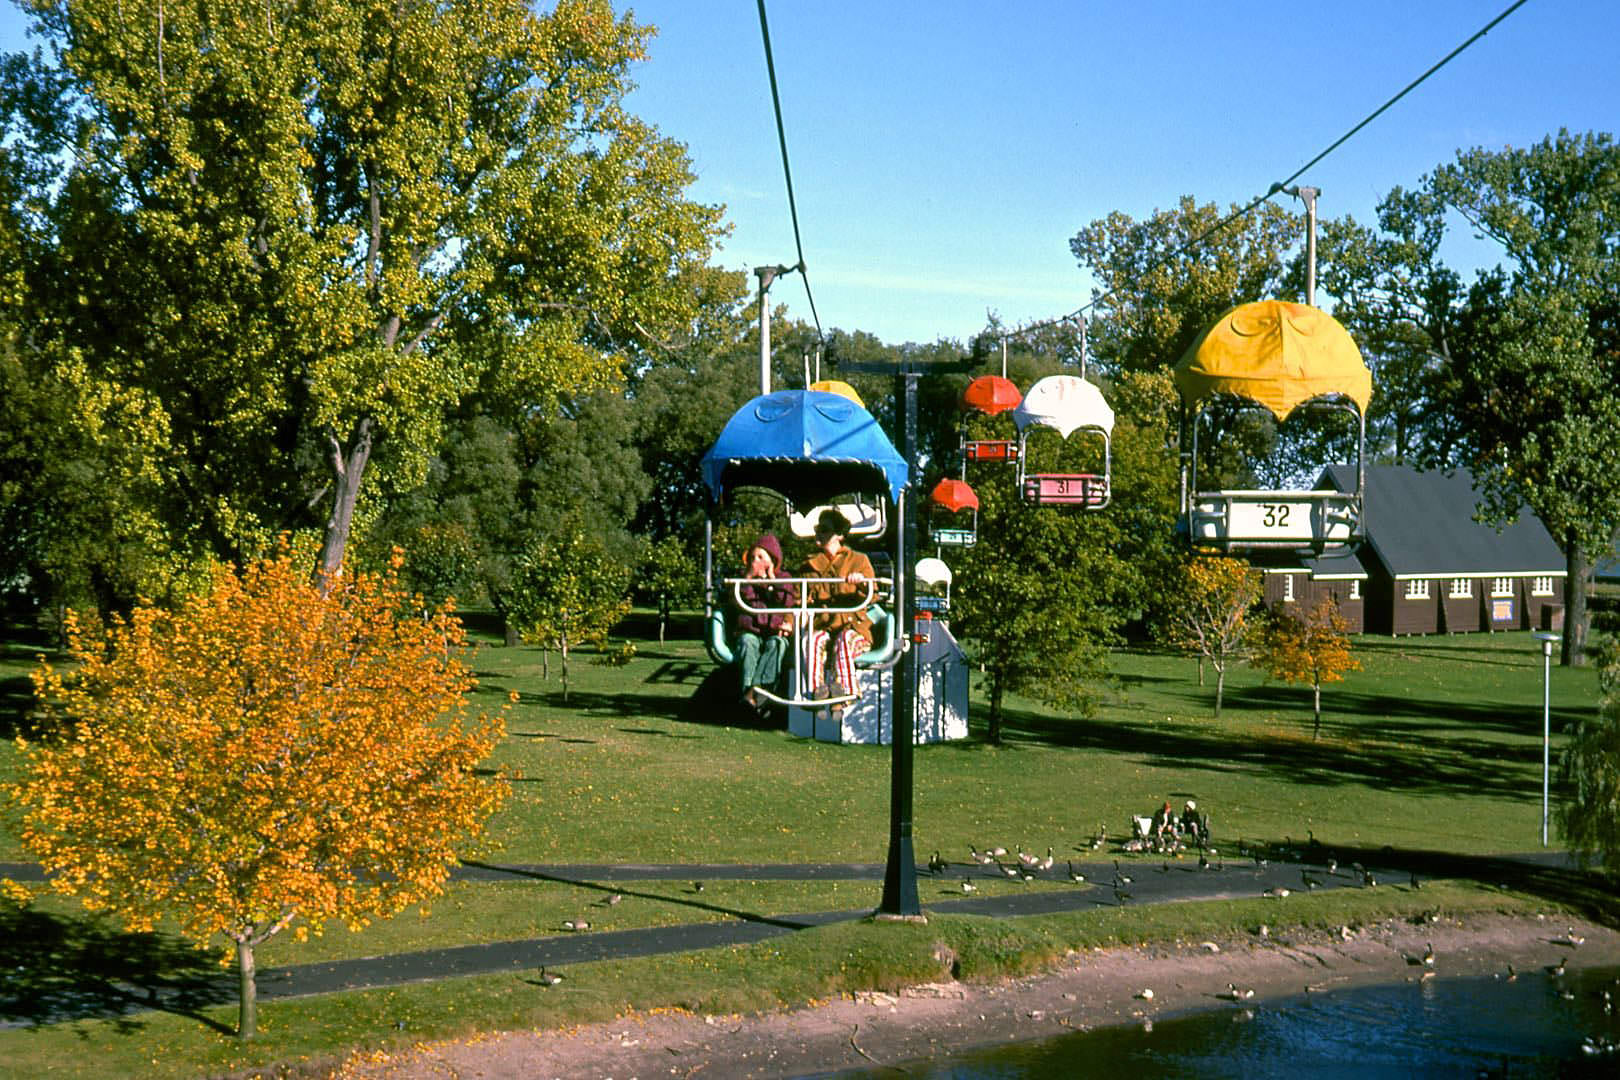 Chairlift at Centreville in the fall of 1974.